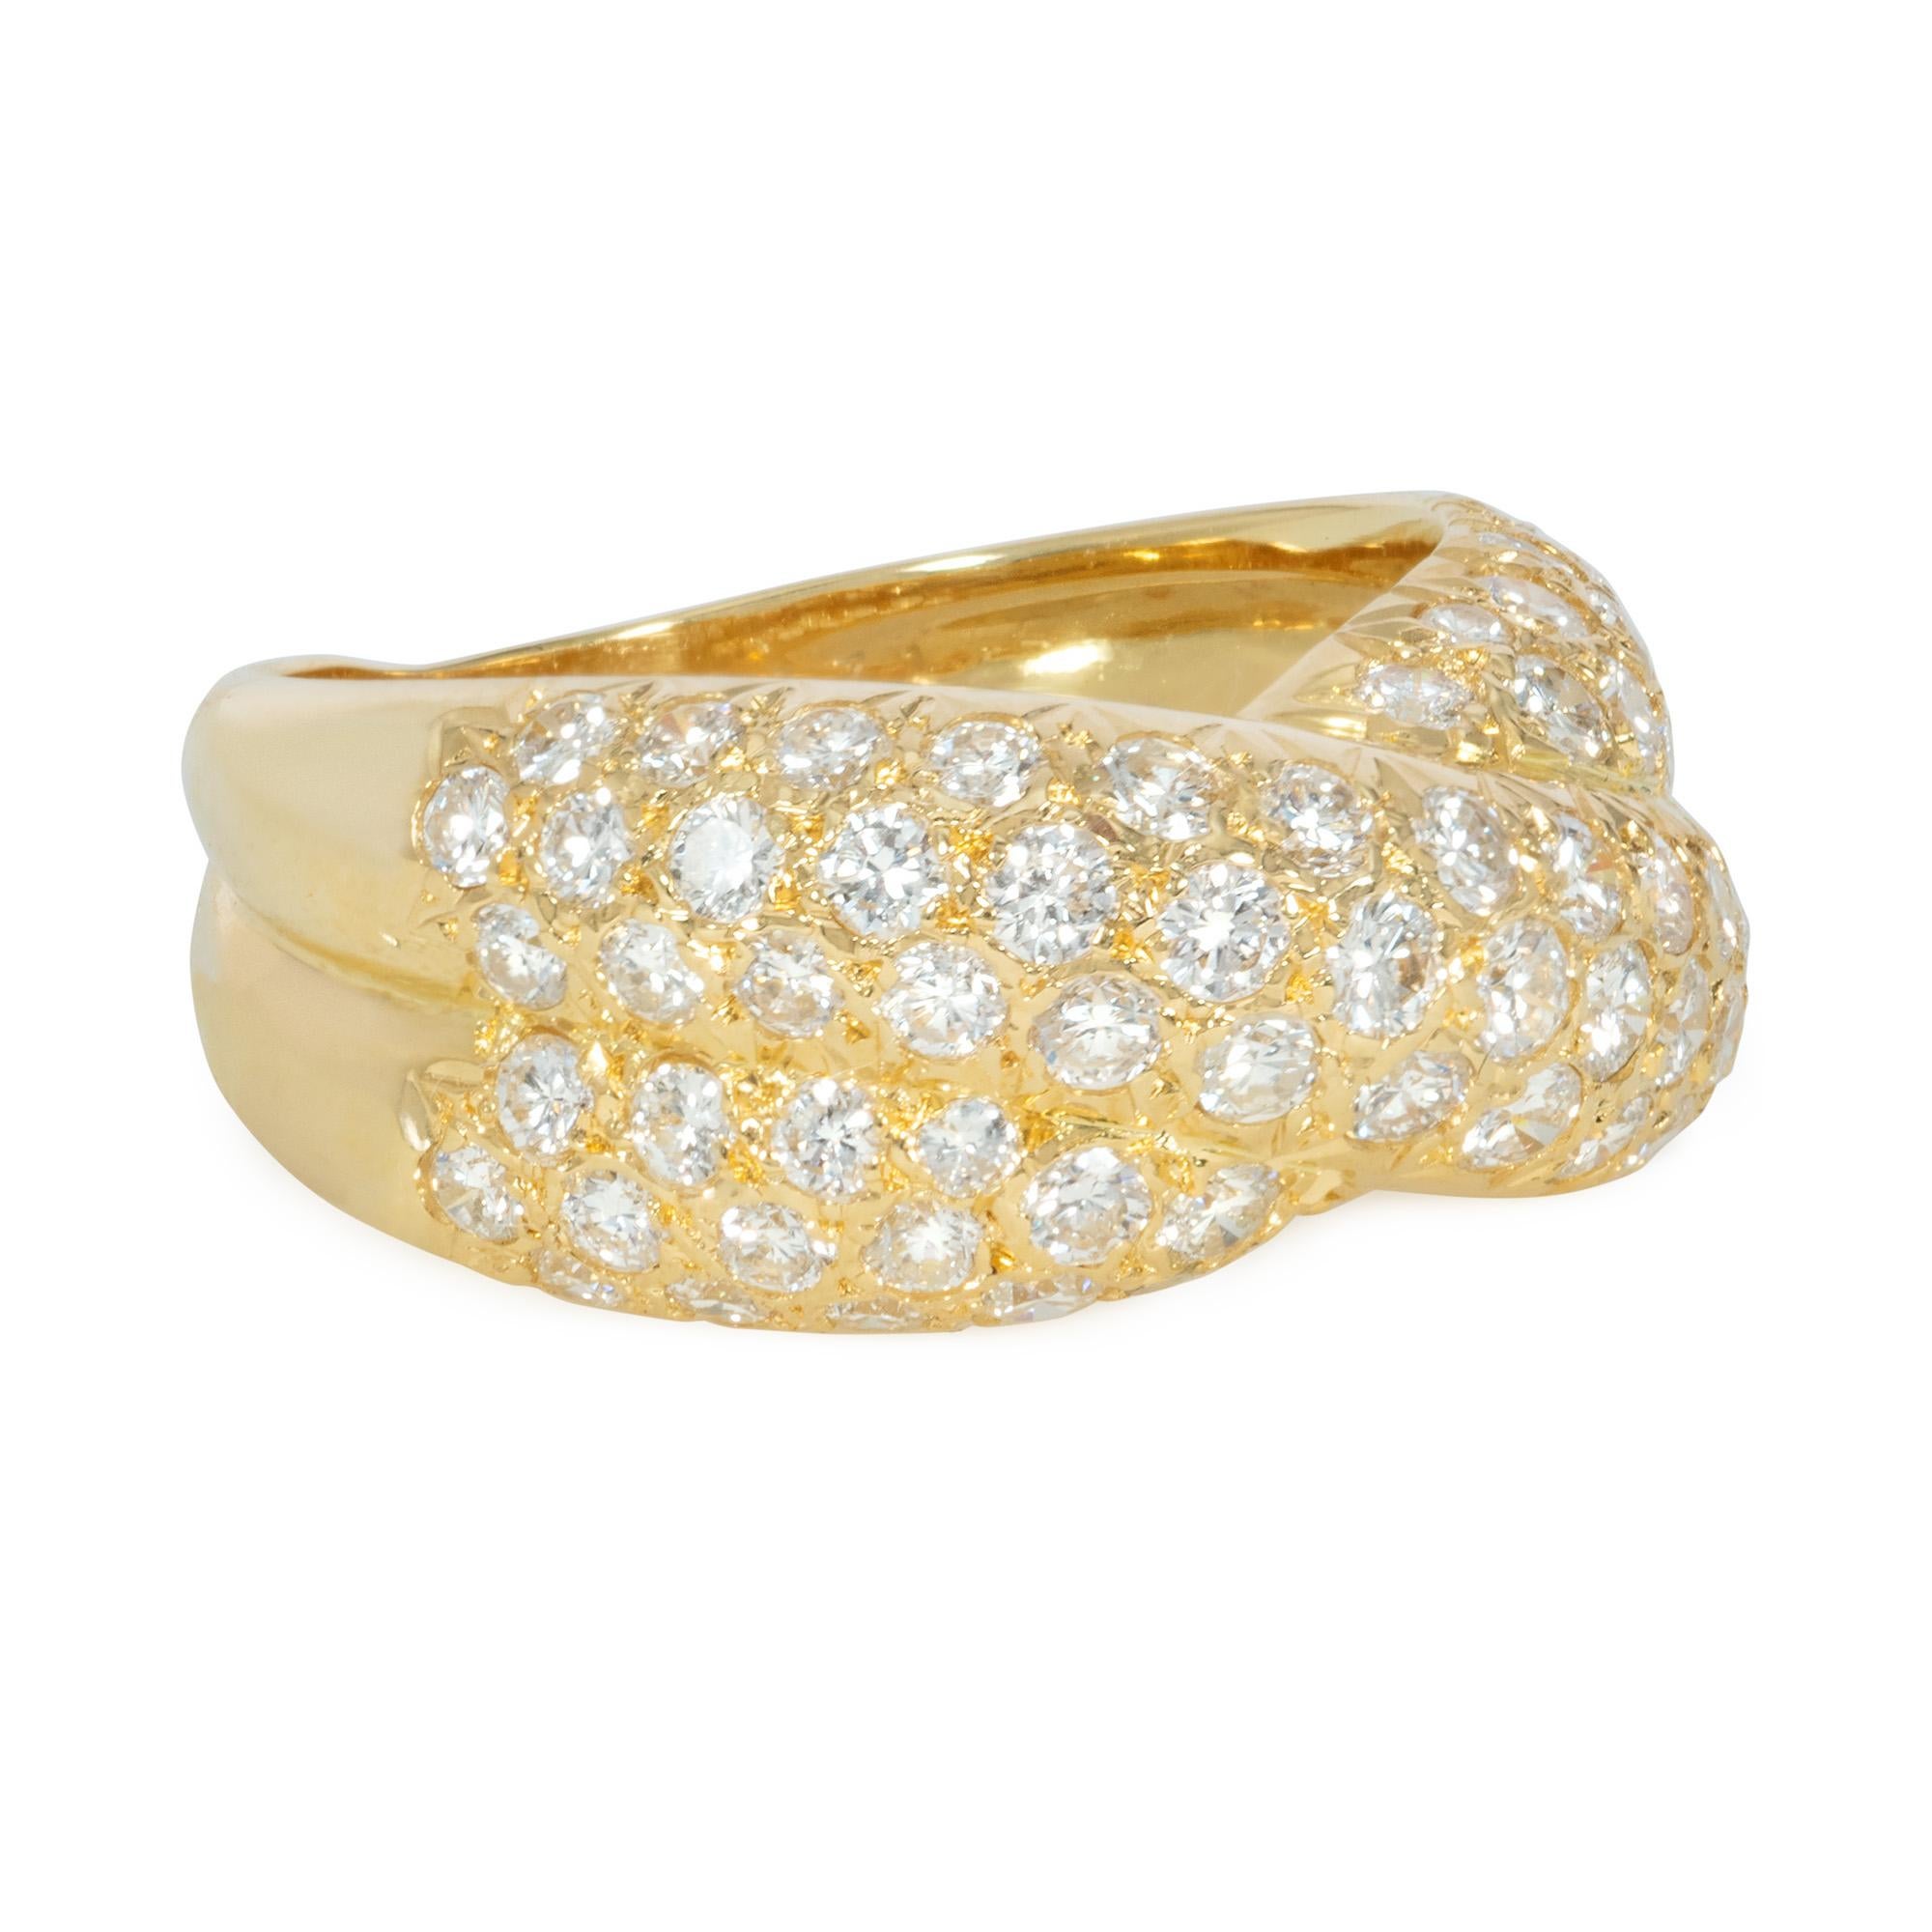 An estate gold and pavé diamond band ring of wrapped, turban/crossover design, in 18k. Van Cleef & Arpels, Paris.  Numbered C5161 A14171.  Atw 1.71 cts.  Width: 9mm

Current size: 6.5; may be reduced in size by means of a spring attached to the